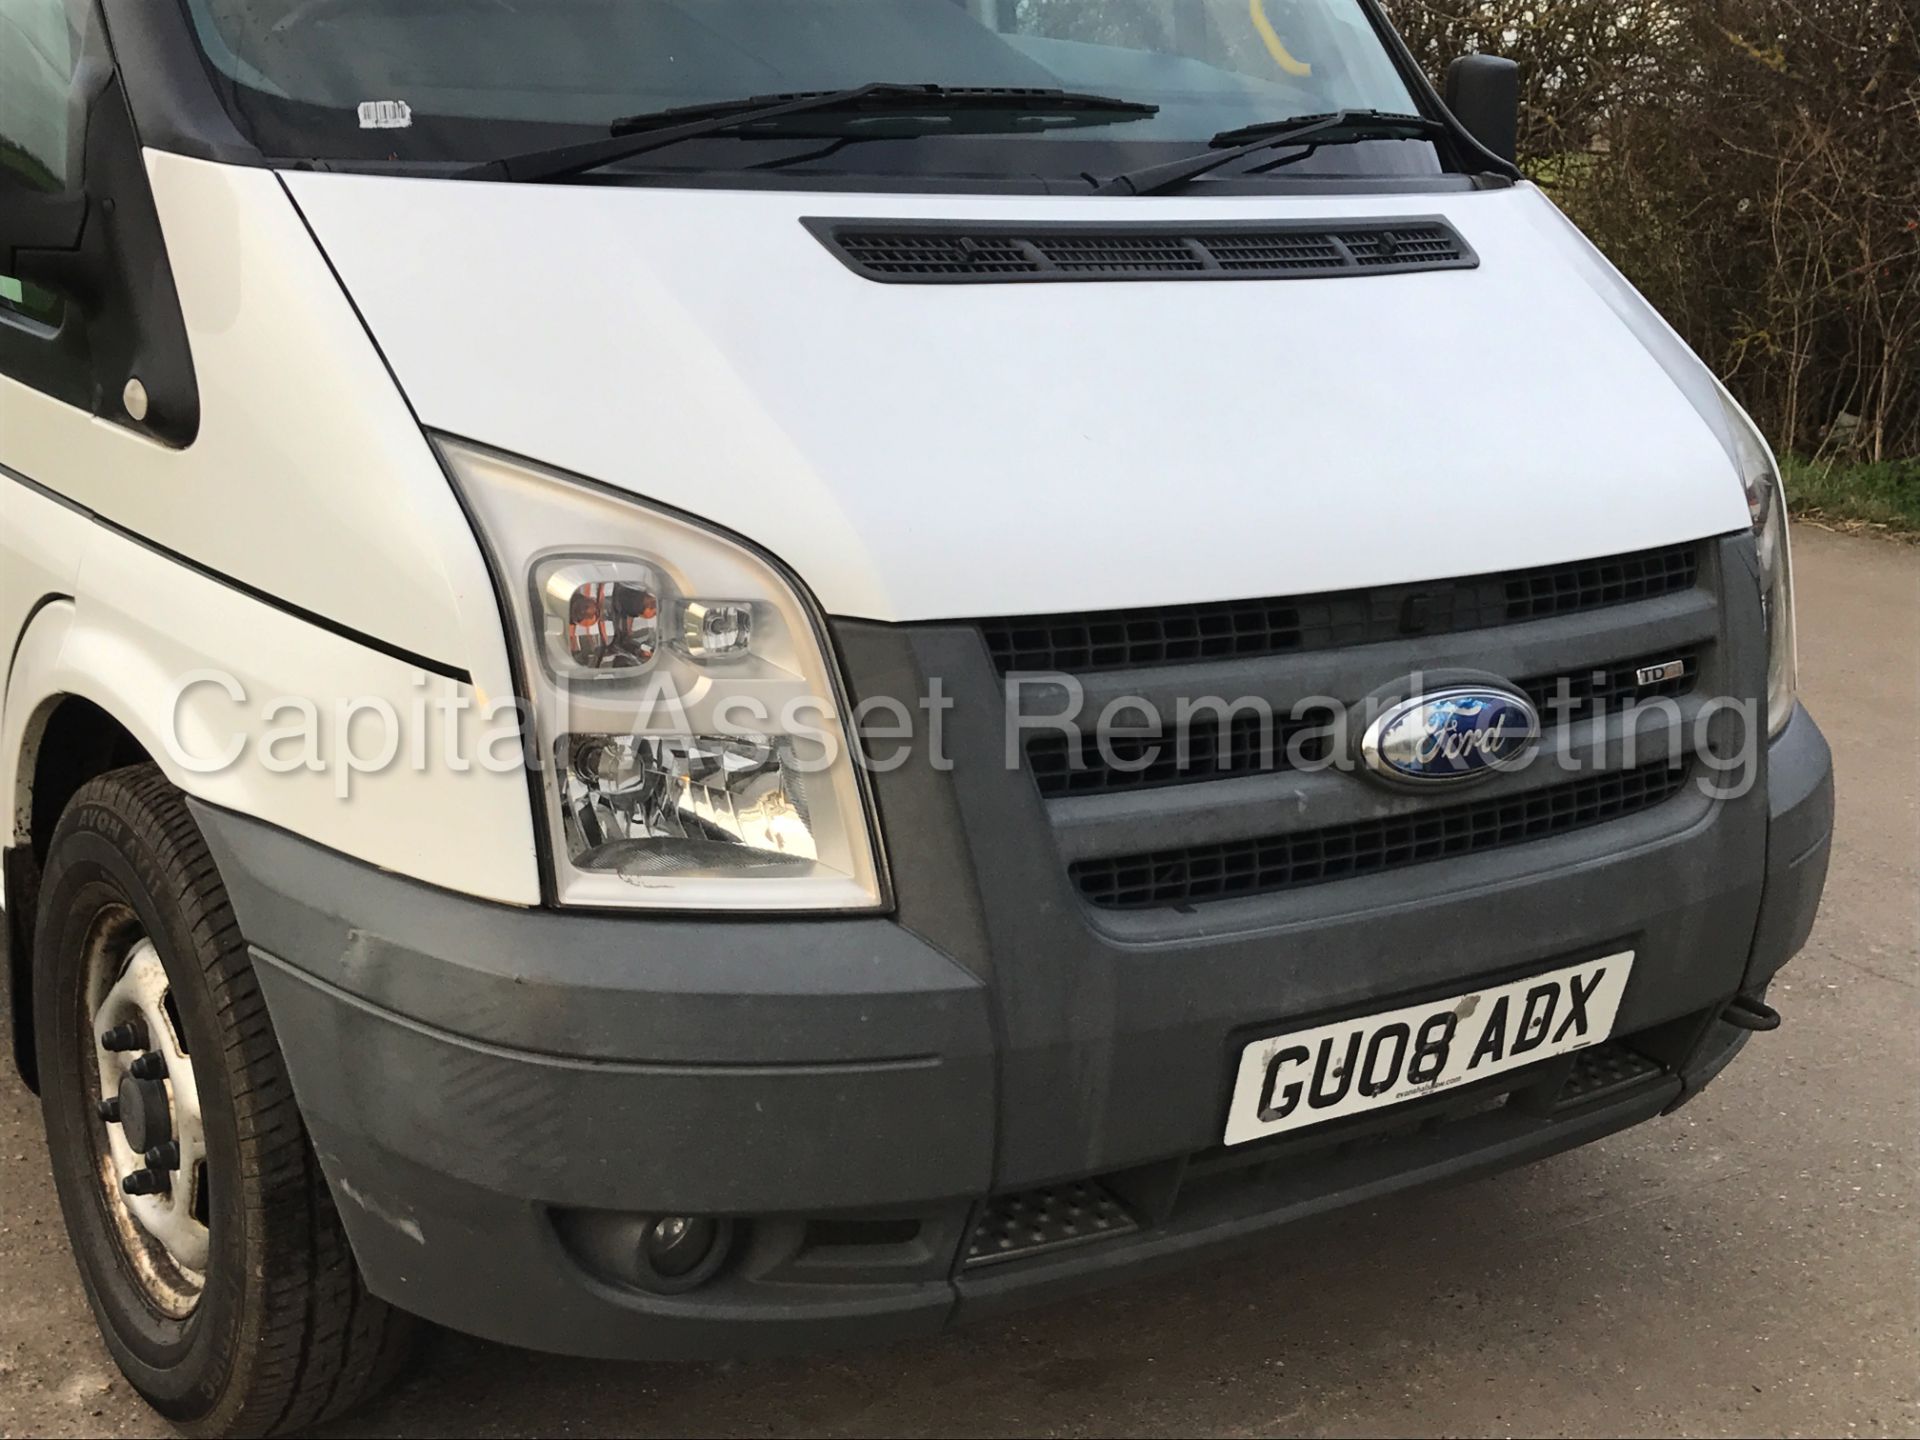 (On Sale) FORD TRANSIT 100 T350 RWD '15 SEATER BUS' (2008) '2.4 TDCI - LWB' **LOW MILES** (NO VAT) - Image 9 of 26